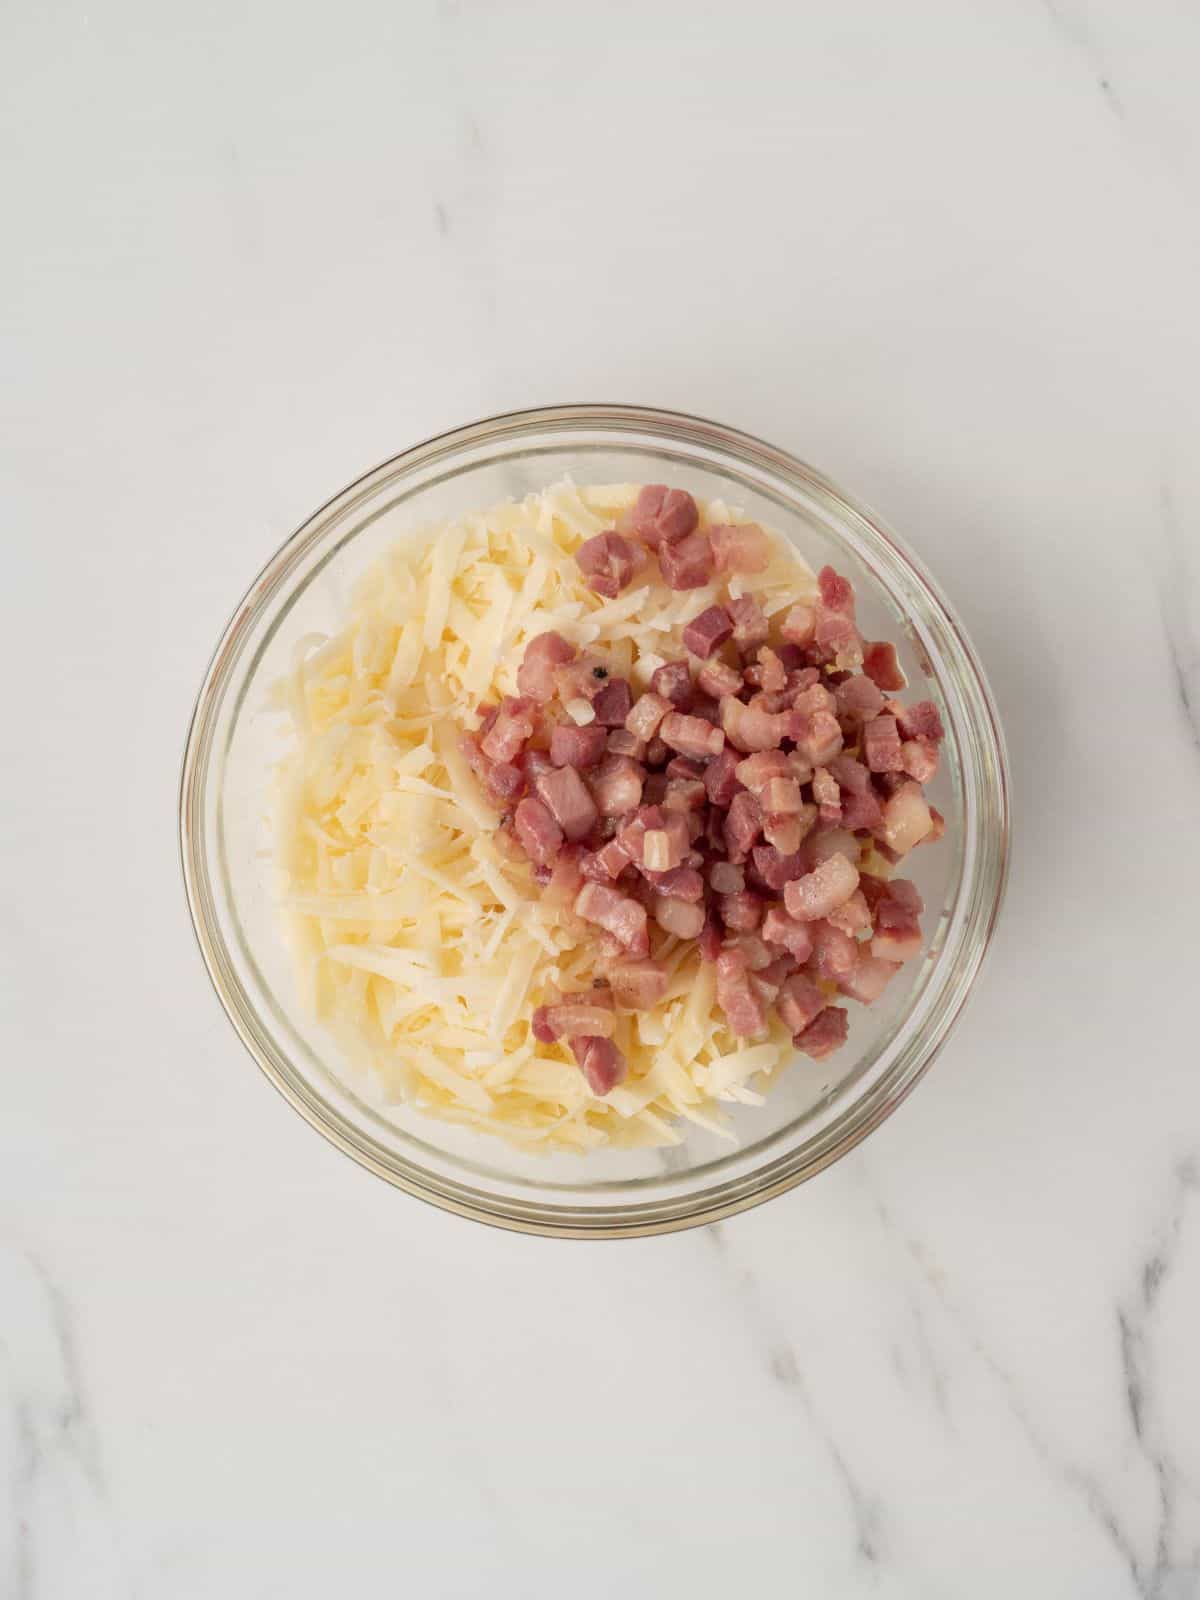 A small glass mixing bowl of cooked pancetta and shredded cheese.